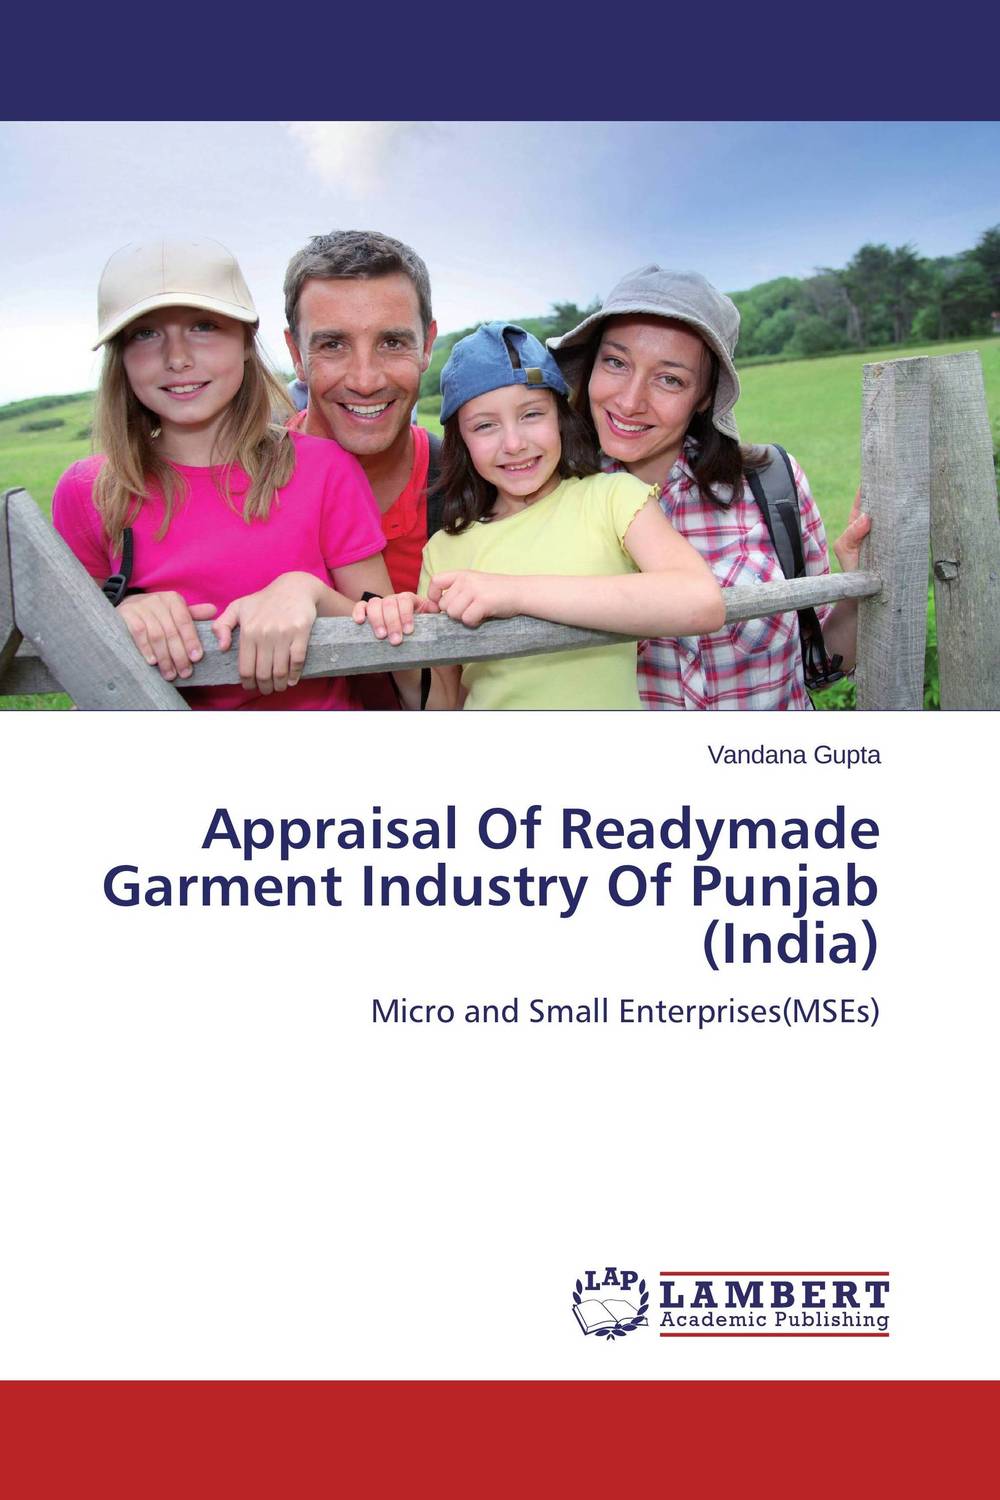 Appraisal Of Readymade Garment Industry Of Punjab (India)